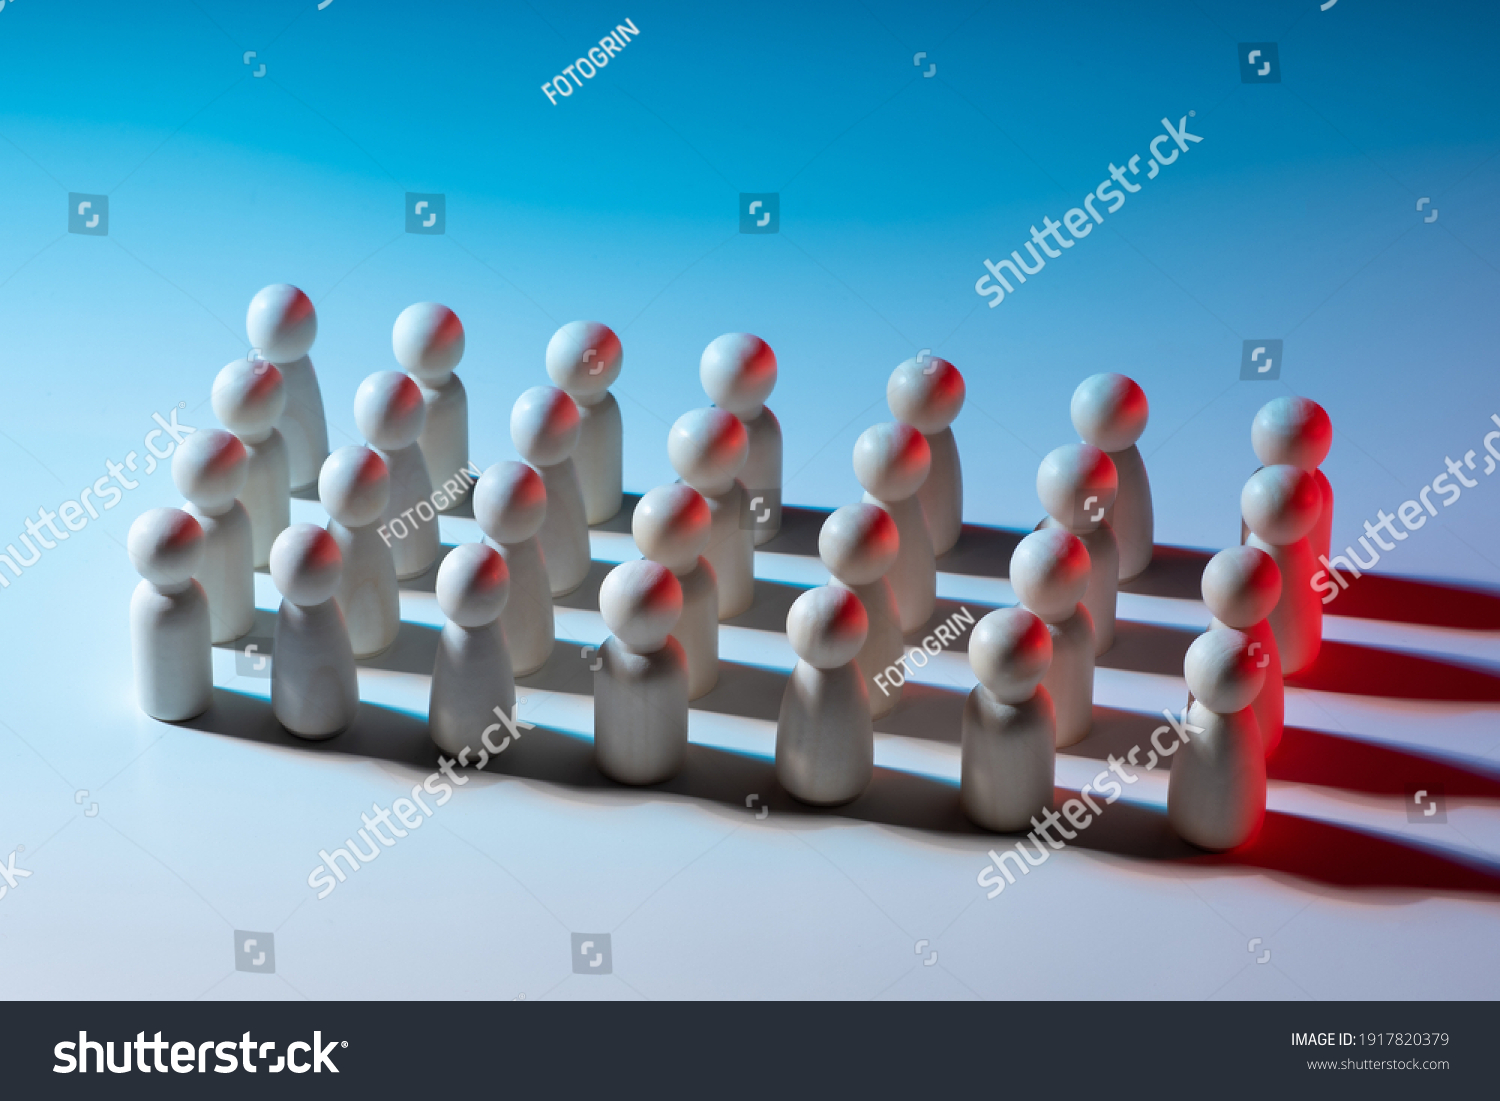 Straight rows of little men. People without individual traits. Suppression of individuality. Political parties or the army. Multitude of faceless people #1917820379